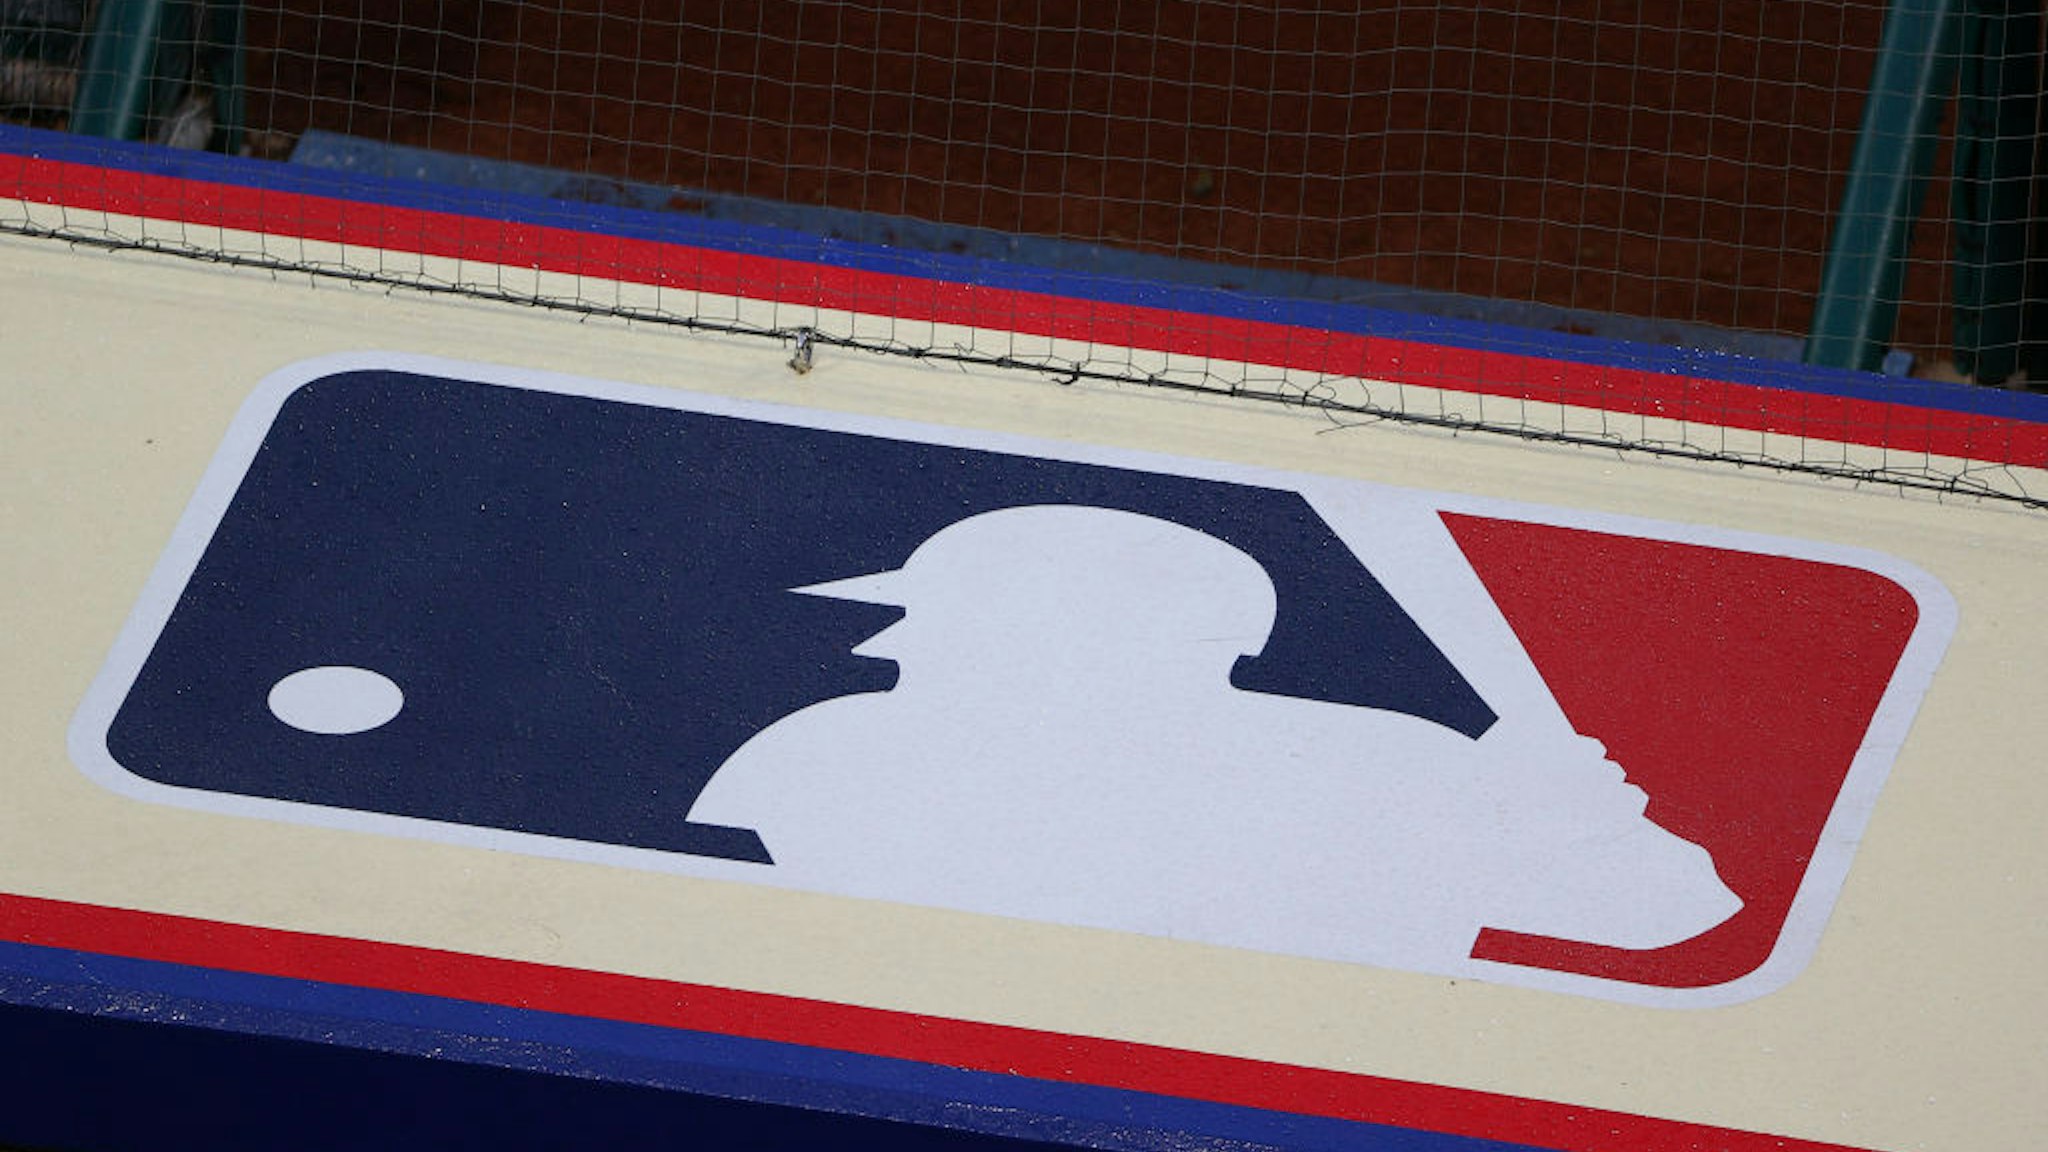 PHILADELPHIA, PA - AUGUST 31: A general view of the Major League Baseball logo atop the dugout logo during the Major League Baseball game between the Philadelphia Phillies and the Washington Nationals on August 31, 2020 at Citizens Bank Park in Philadelphia, PA. (Photo by Rich Graessle/Icon Sportswire via Getty Images)